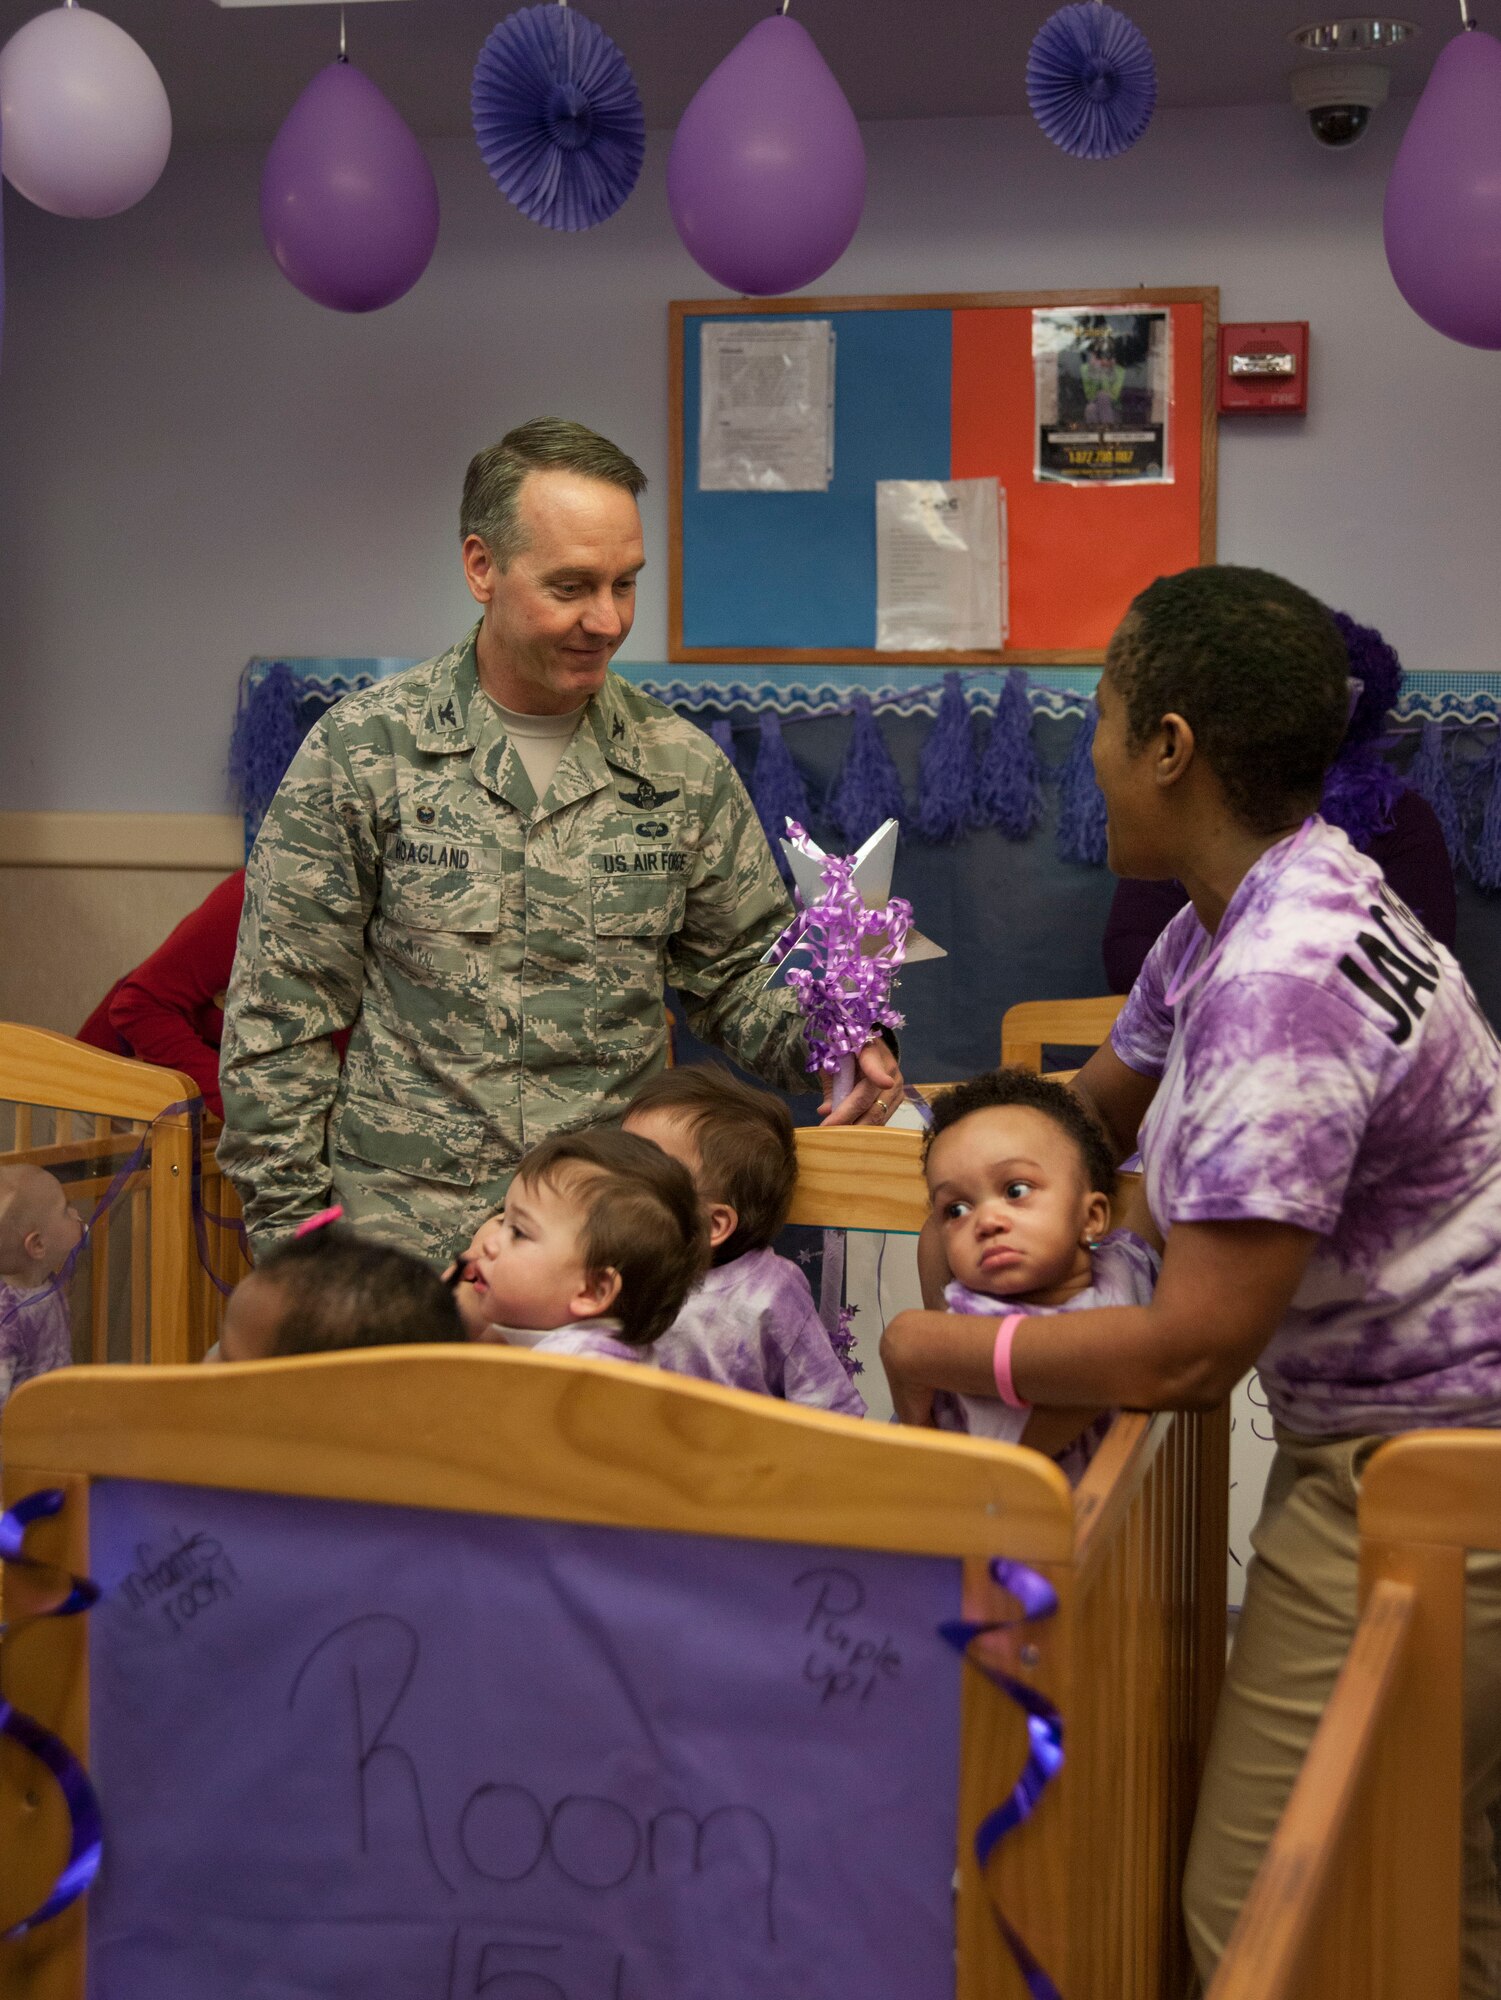 Col. Bradley Hoagland, 11th Wing/Joint Base Andrews commander, visits with staff and students before a “purple” parade at JBA’s Child Development Center Three April 7, 2016. The school parade kicks off the Month of the Military Child, a time to honor military youth for the important role they play in contributing to the strength of the military family. (U.S. Air Force photo by Airman 1st Class Rustie Kramer/Released)